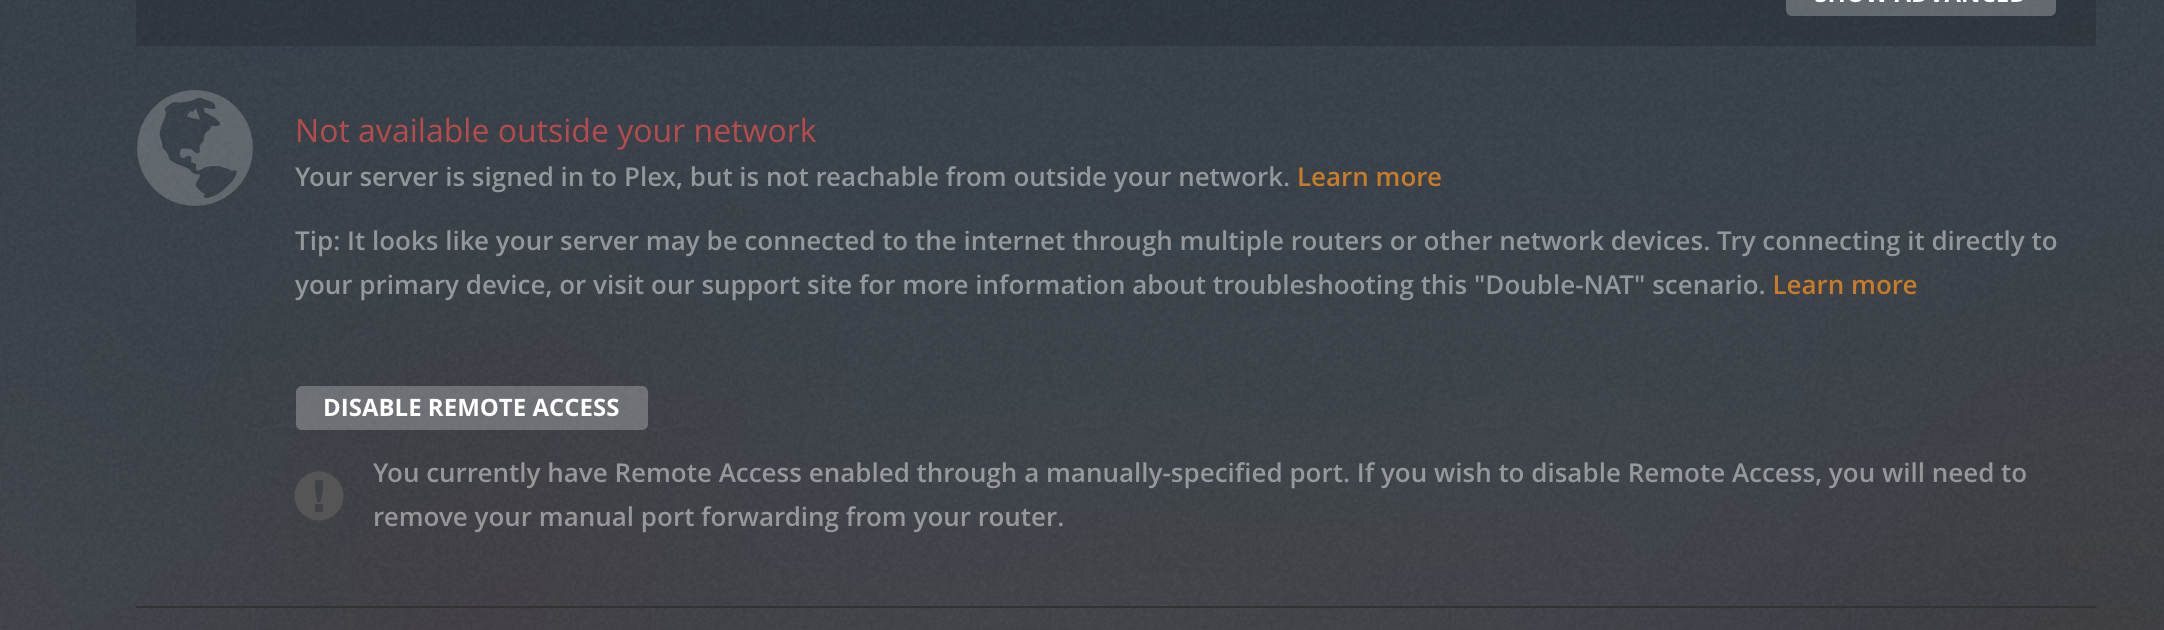 Plex slow on local network cable